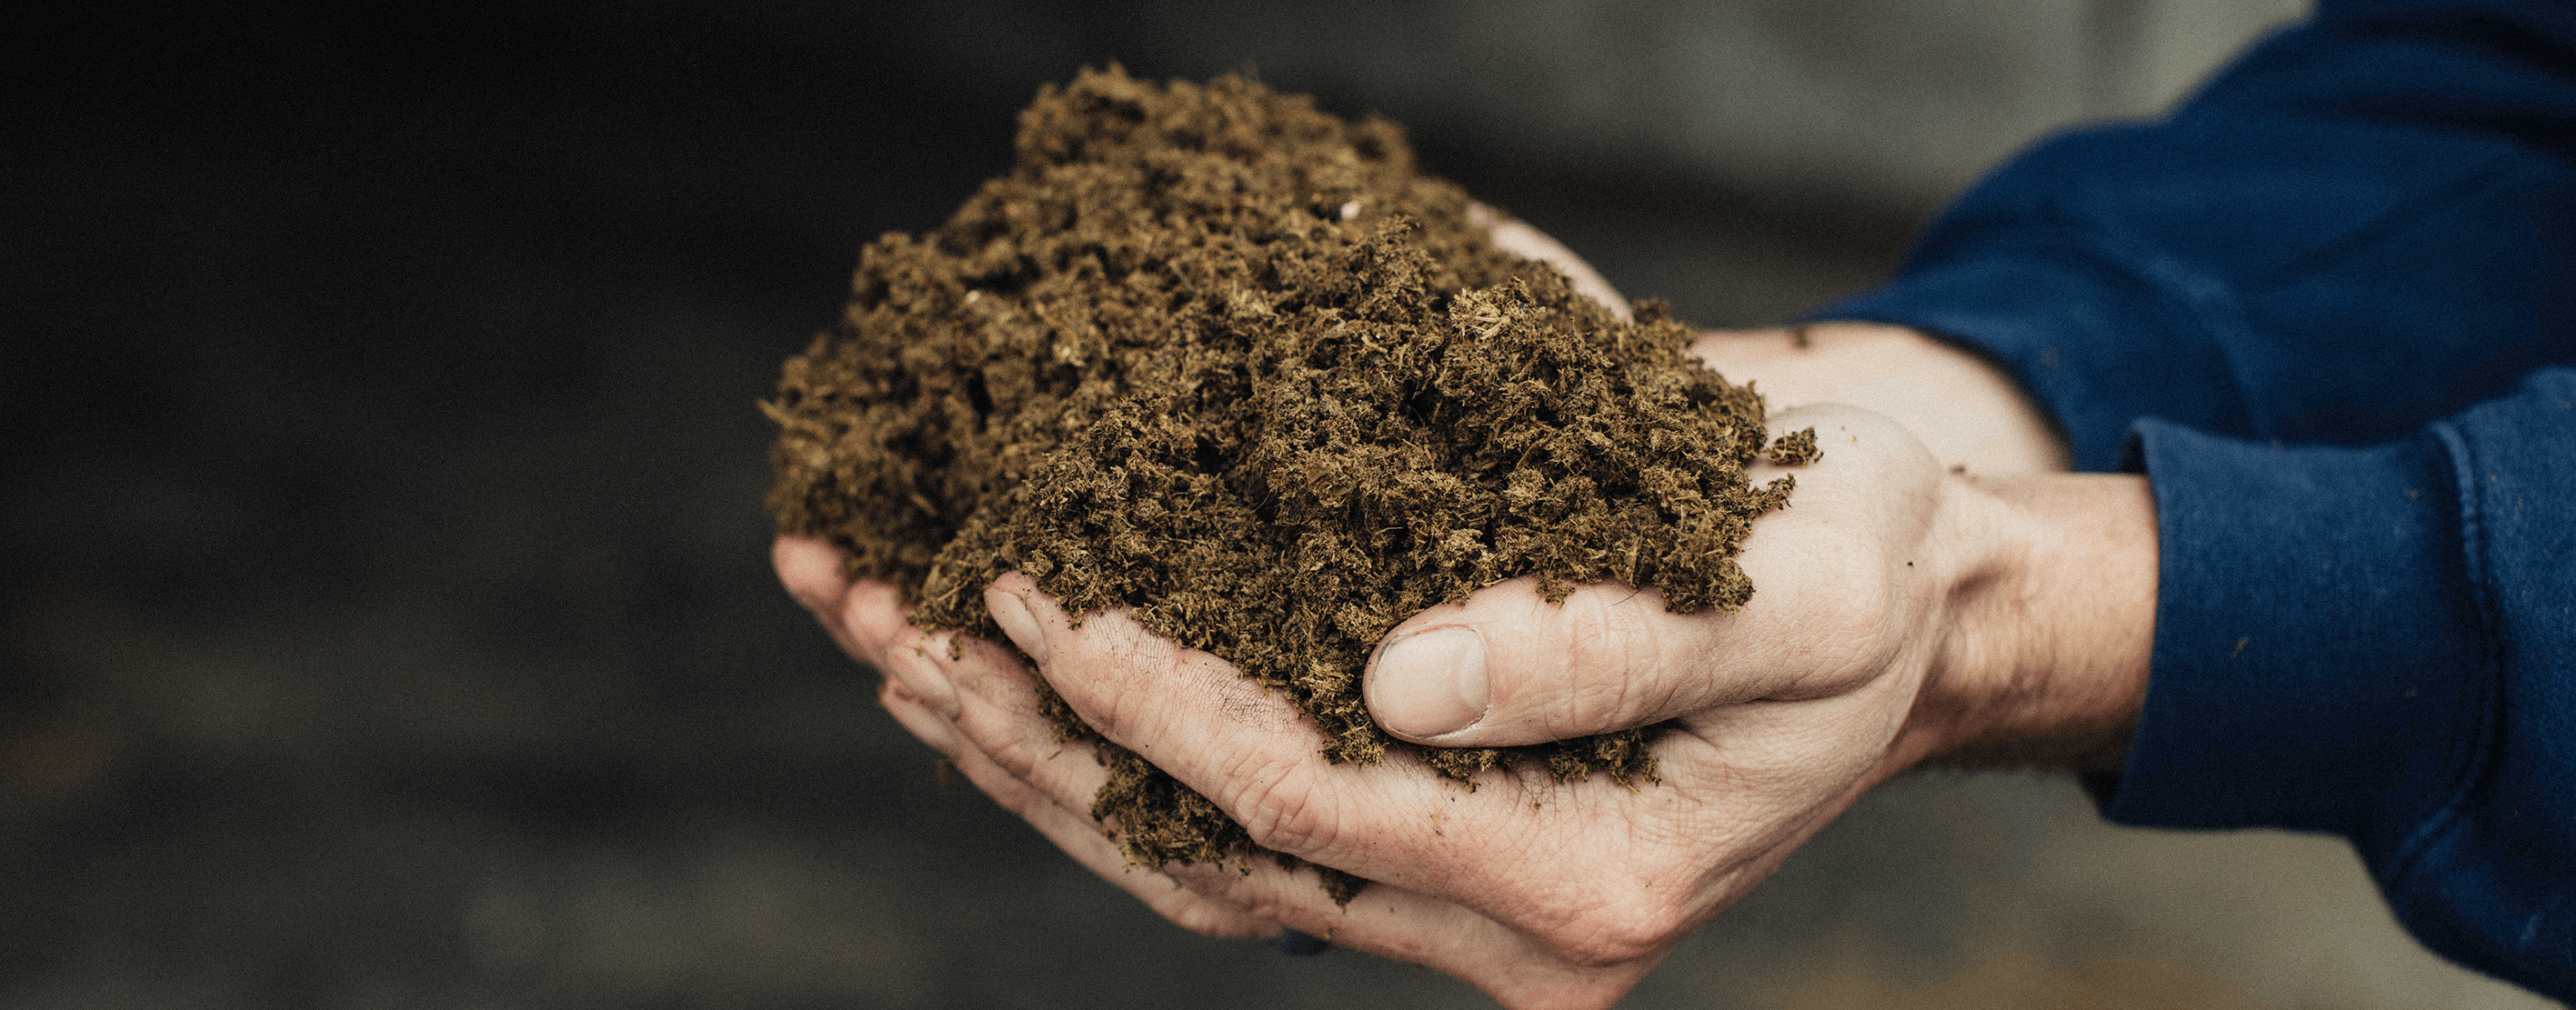 Close-up of hands holding manure